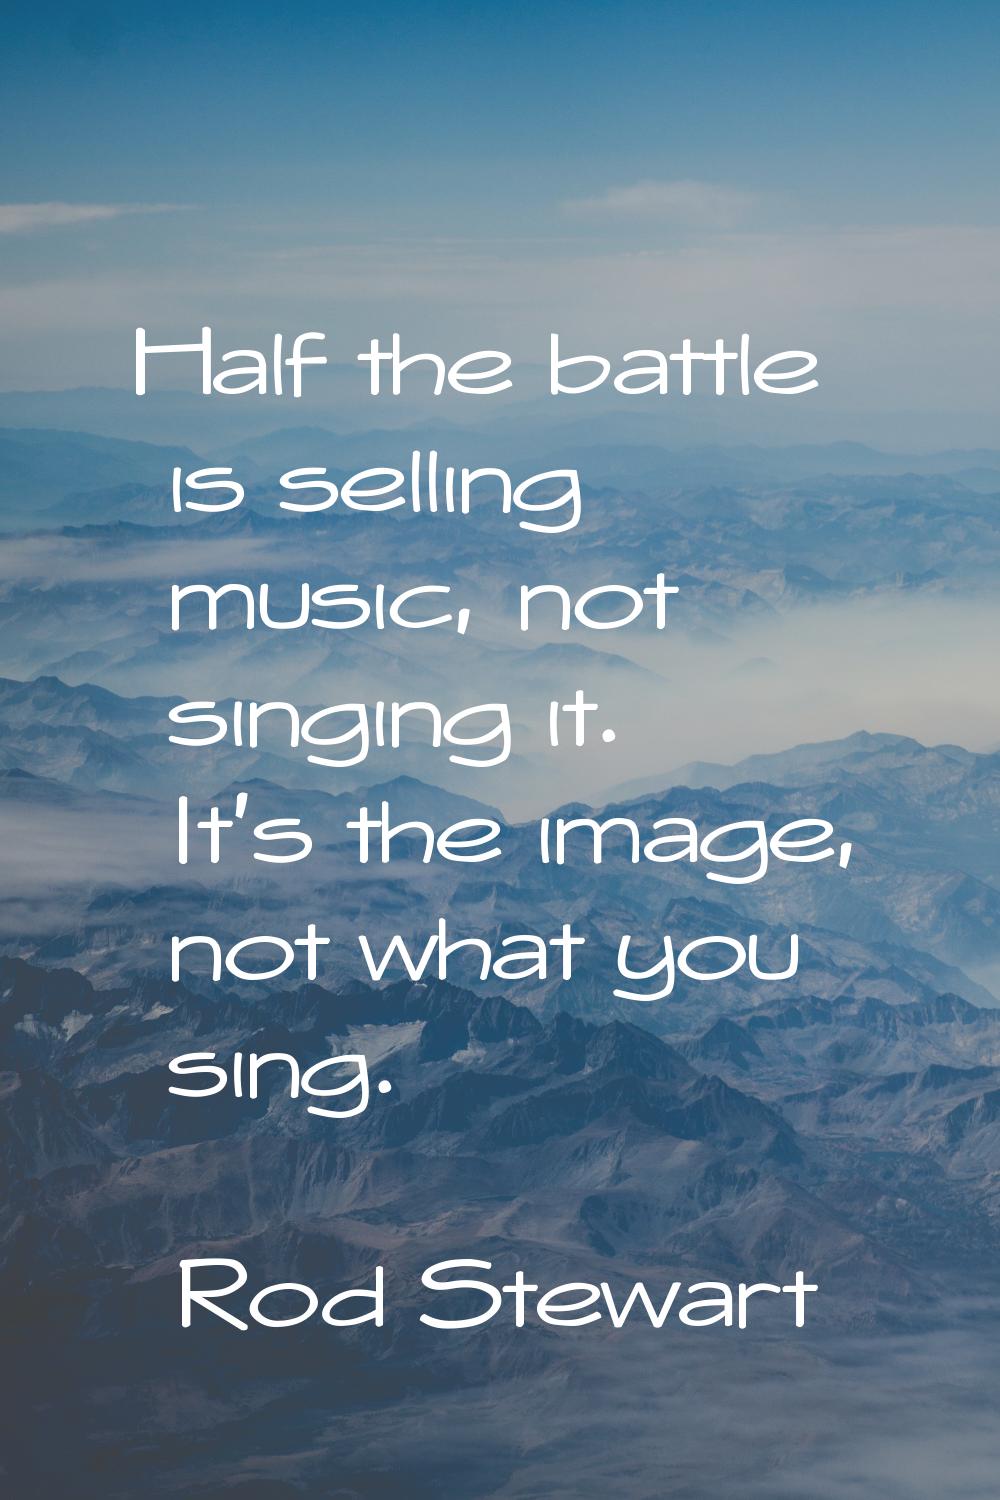 Half the battle is selling music, not singing it. It's the image, not what you sing.